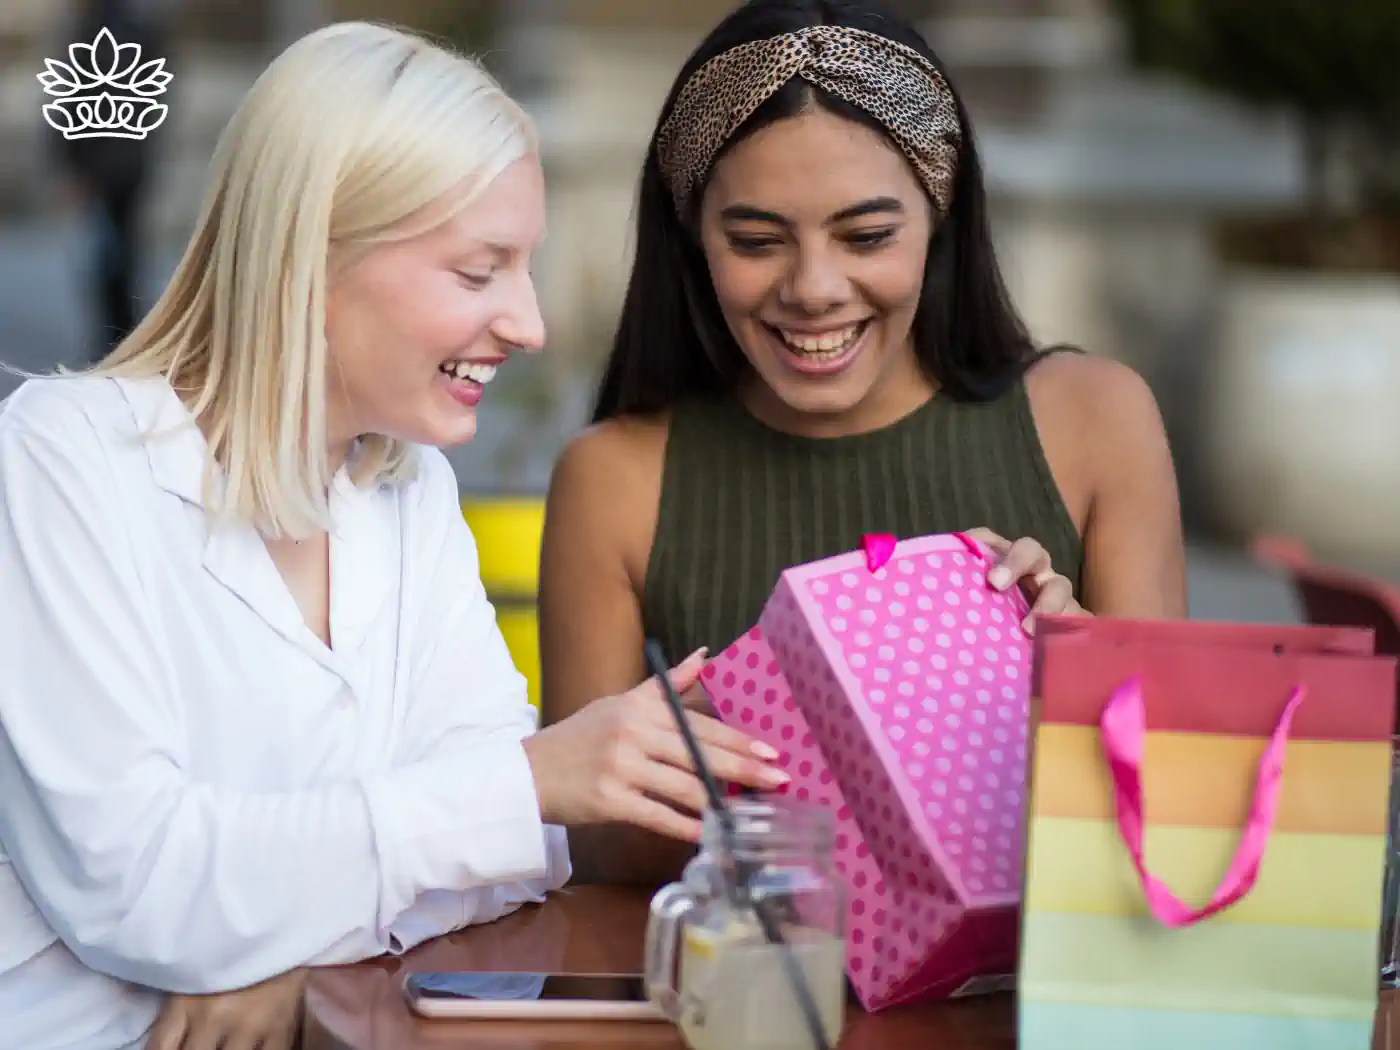 Two joyful women sharing a lively moment while looking at colorful gift bags at an outdoor café. Fabulous Flowers and Gifts - Thank You Gift Boxes. Delivered with Heart.